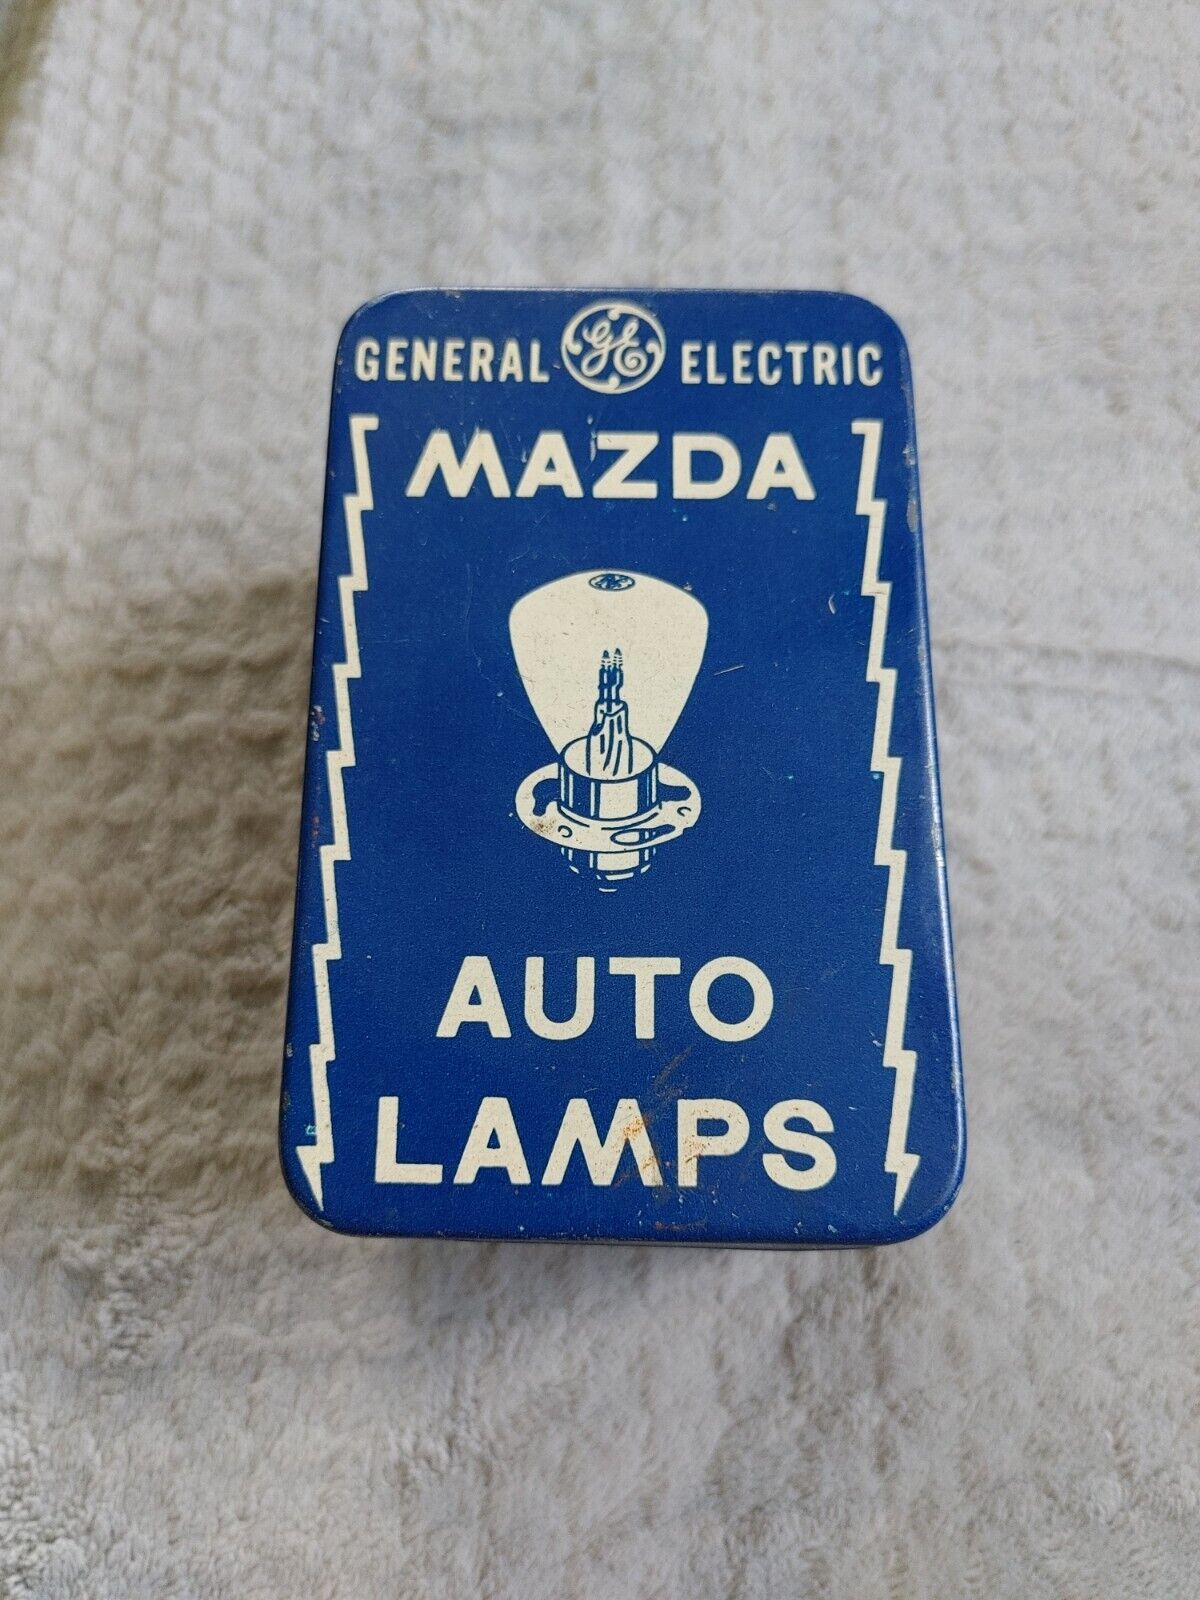 Very Clean Vintage Mazda Auto Lamps Tin Can